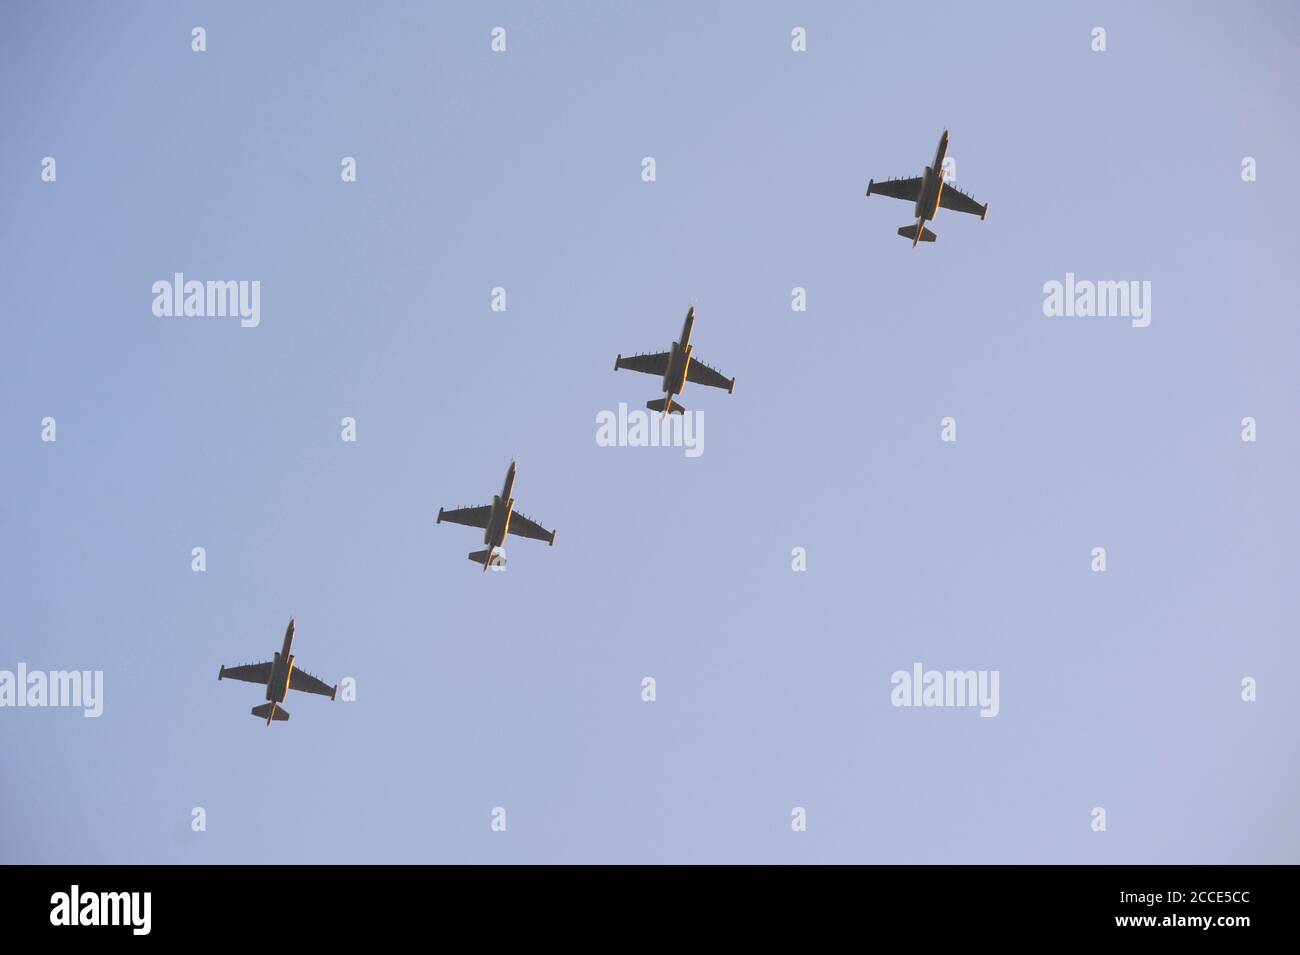 Warplanes air fighters flying in a sky, military parade Stock Photo